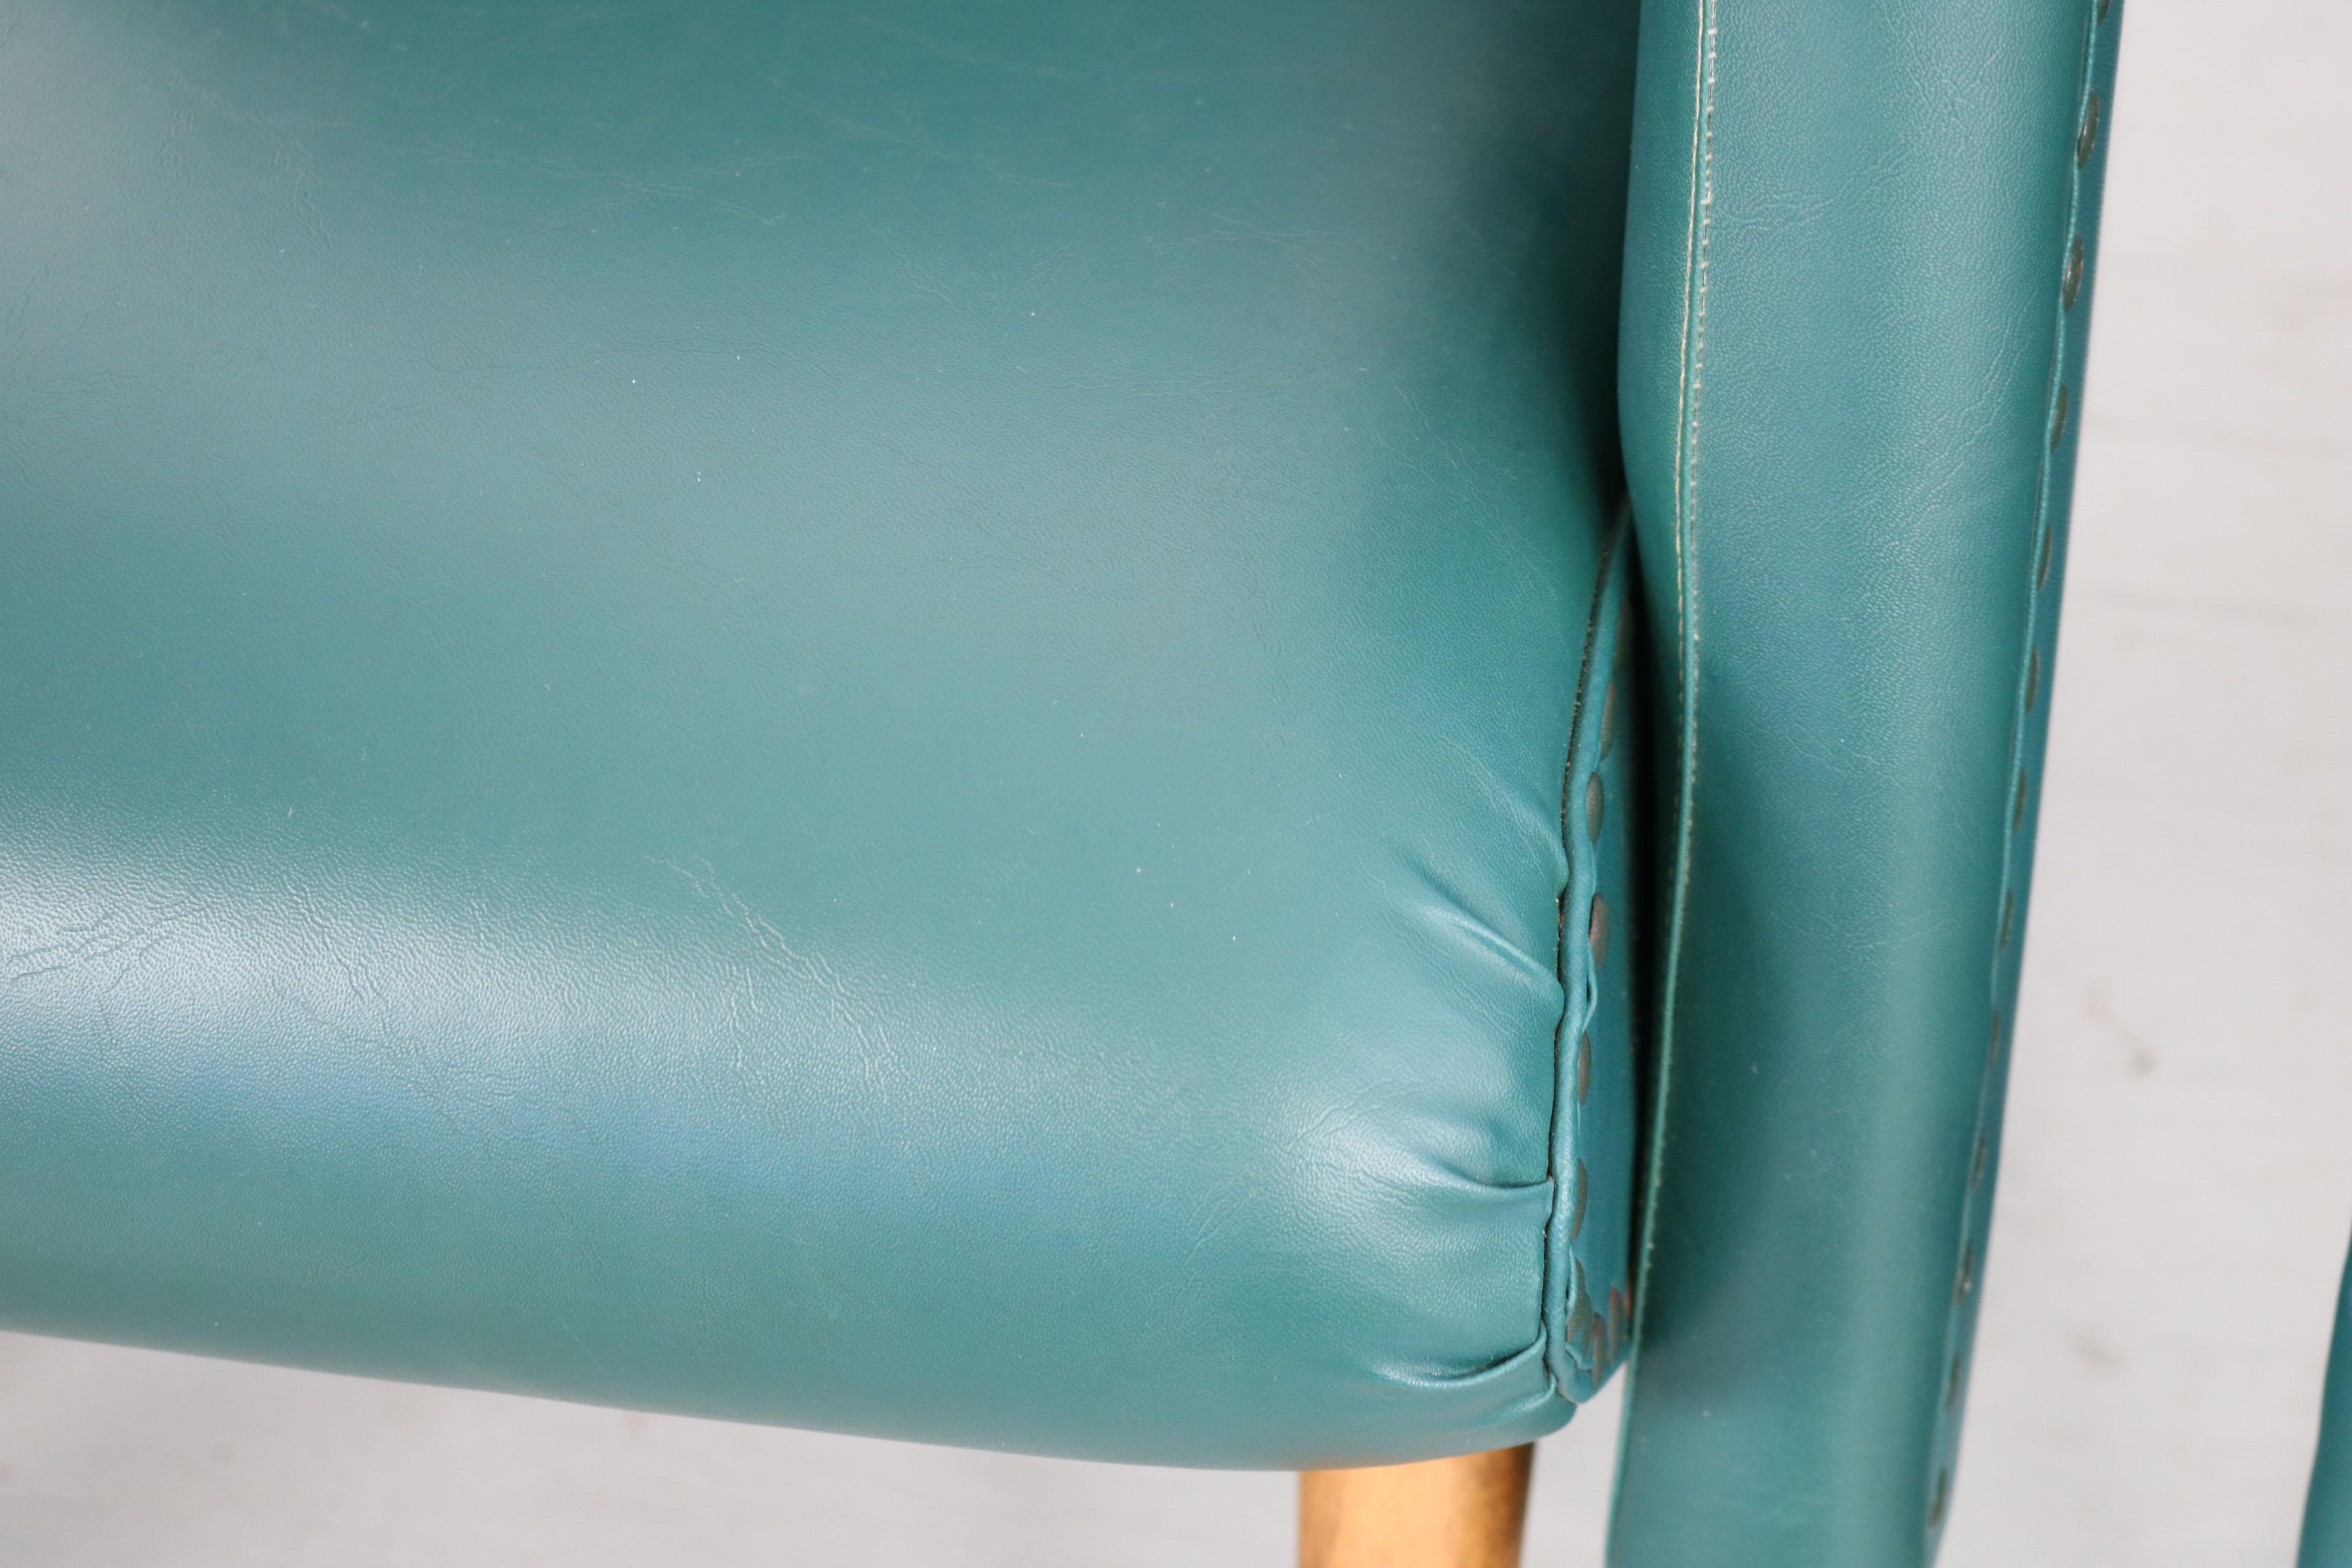 Pair of Italian Chairs in Original Green Imitation Leather Upholstery, 1950 For Sale 8